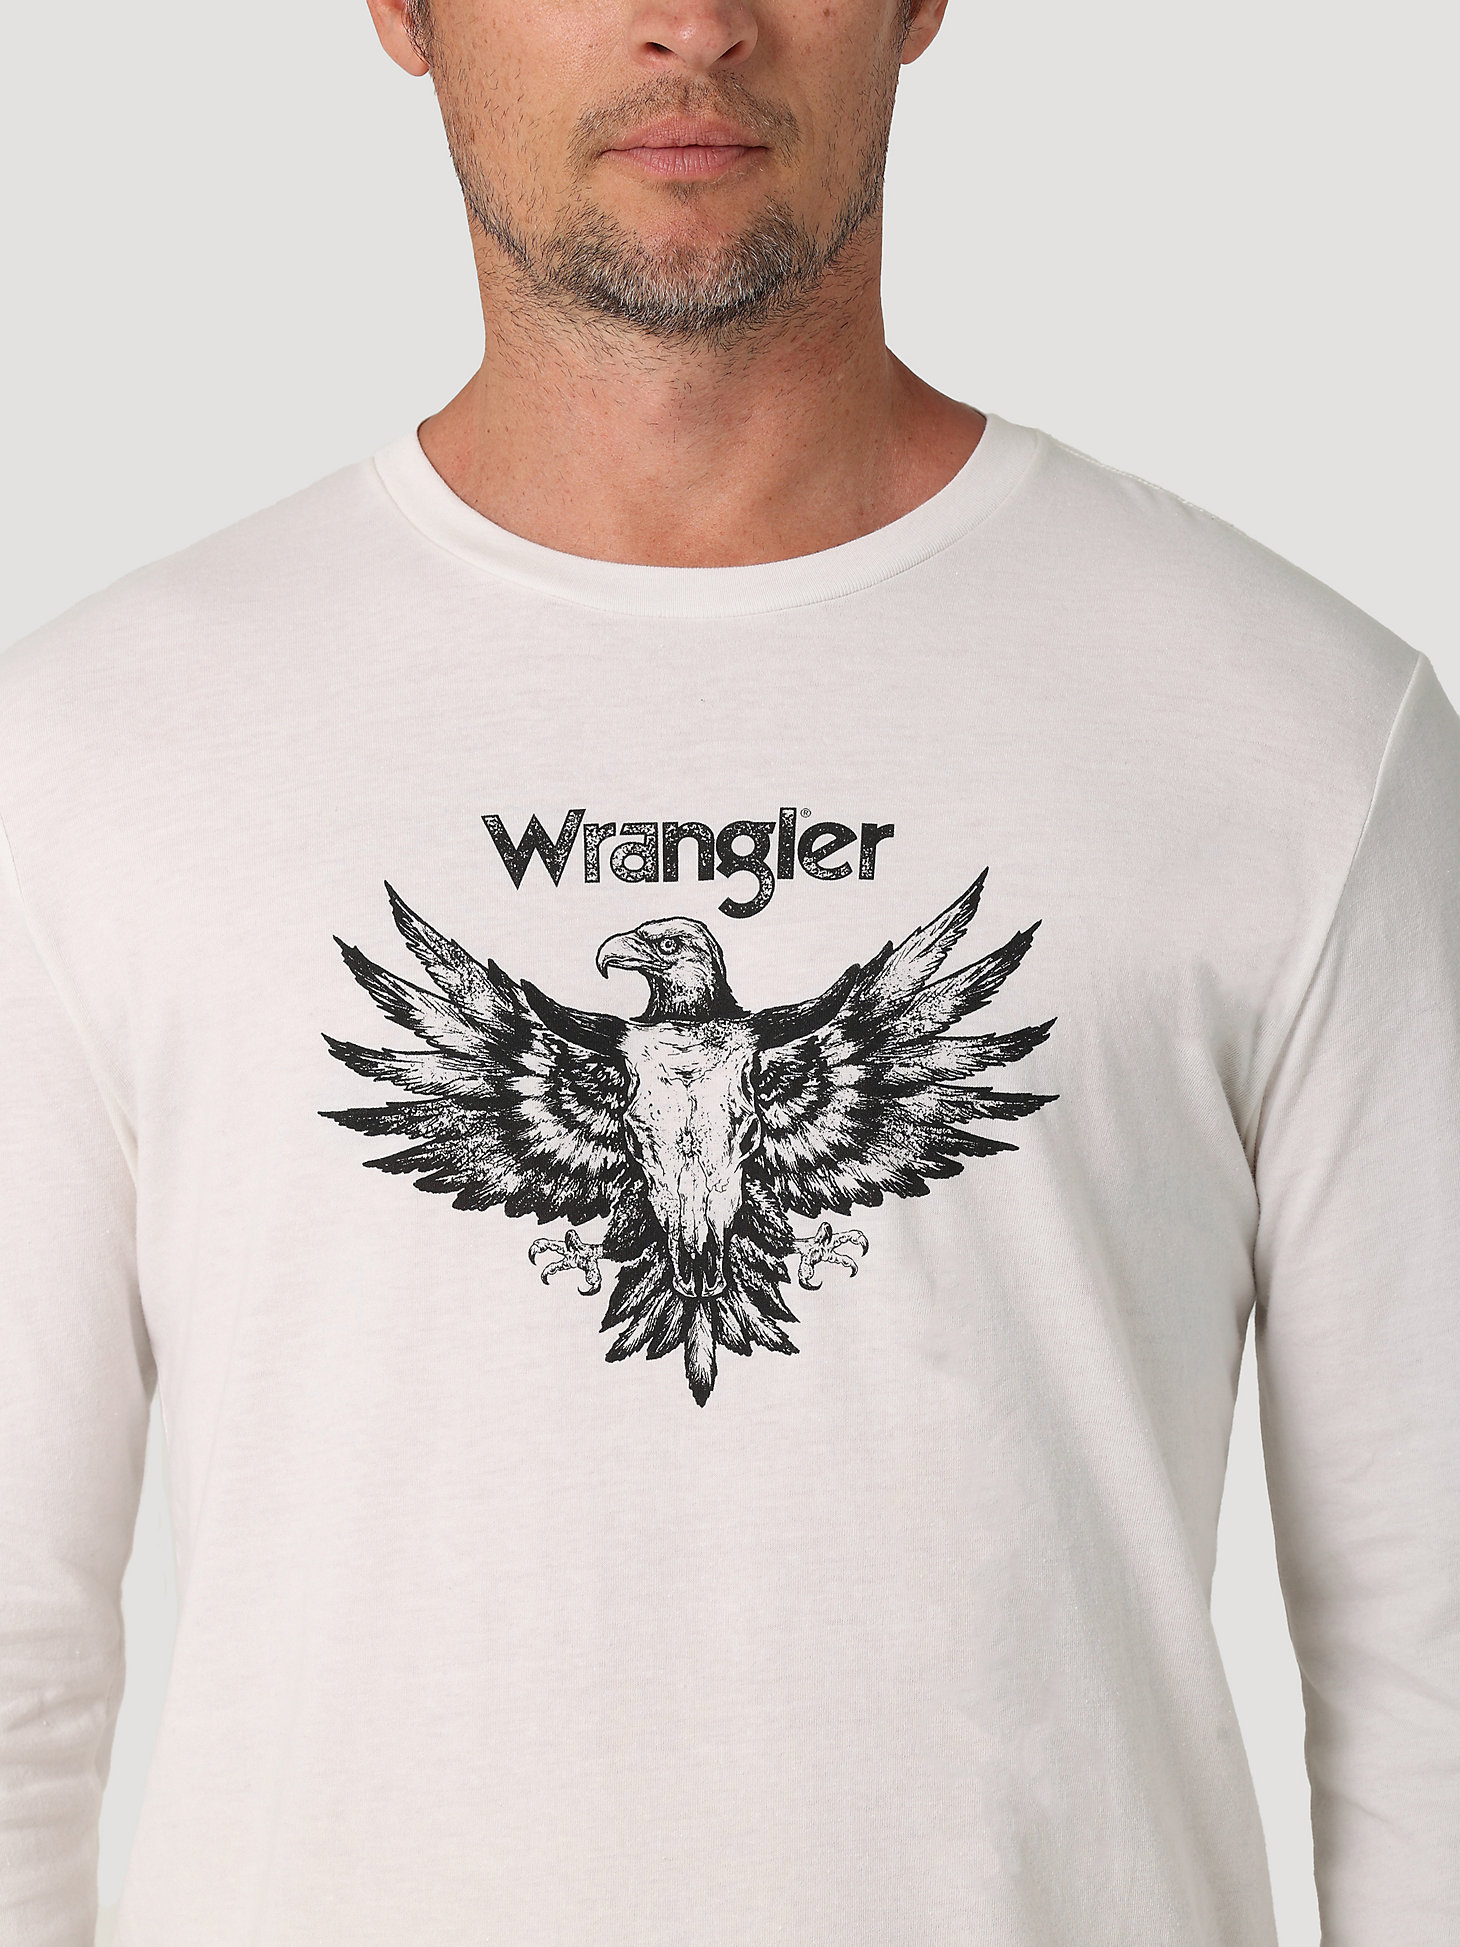 Men's Long Sleeve Eagle in Flight Graphic T-Shirt in Marshmallow alternative view 2